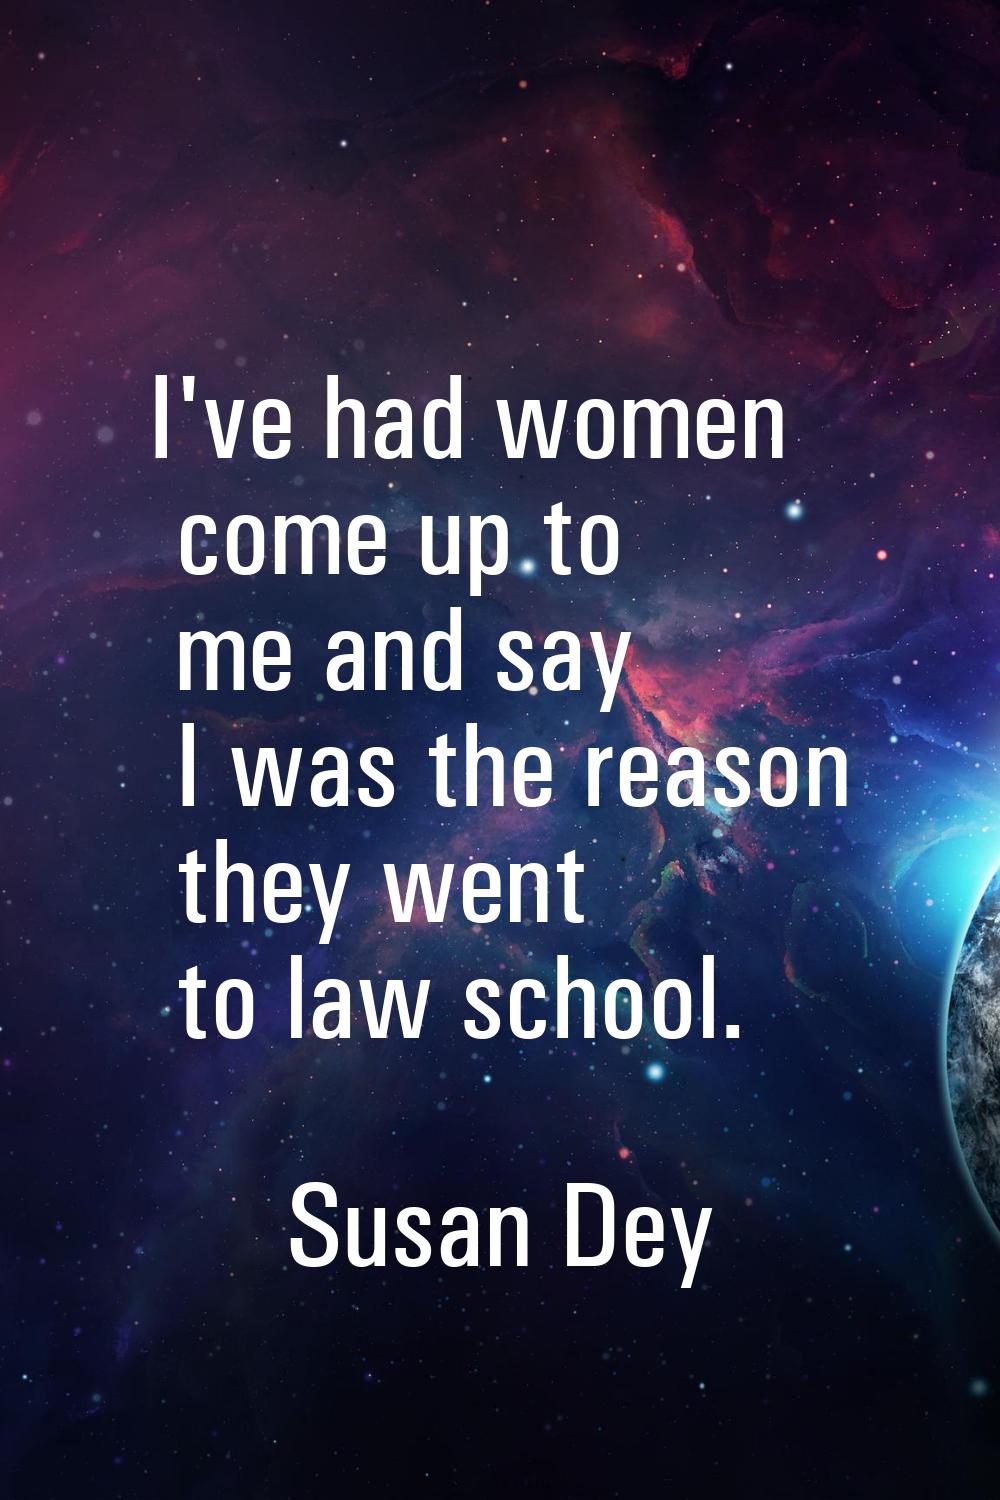 I've had women come up to me and say I was the reason they went to law school.